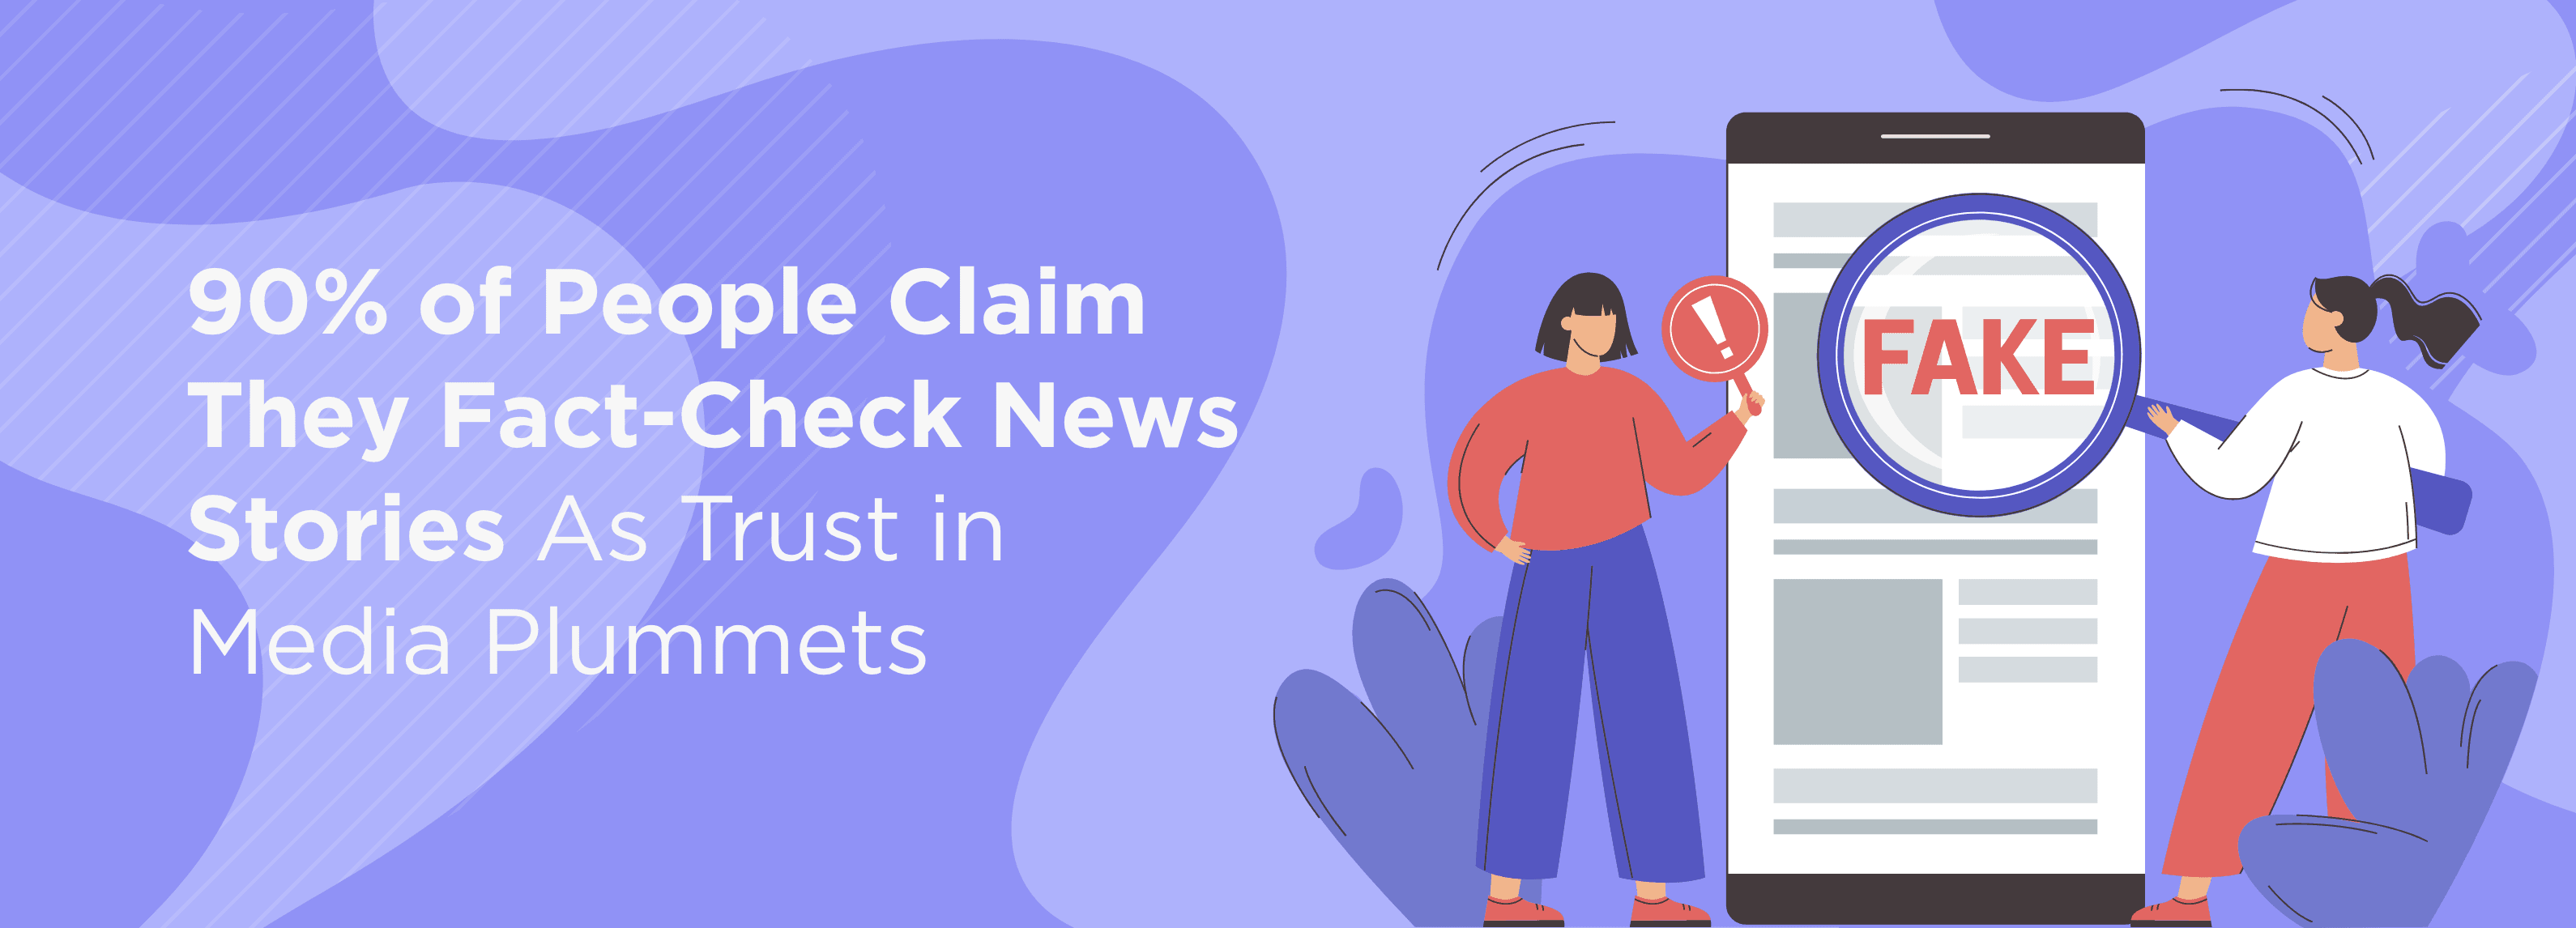 90% of People Claim They Fact-Check News Stories As Trust in Media Plummets